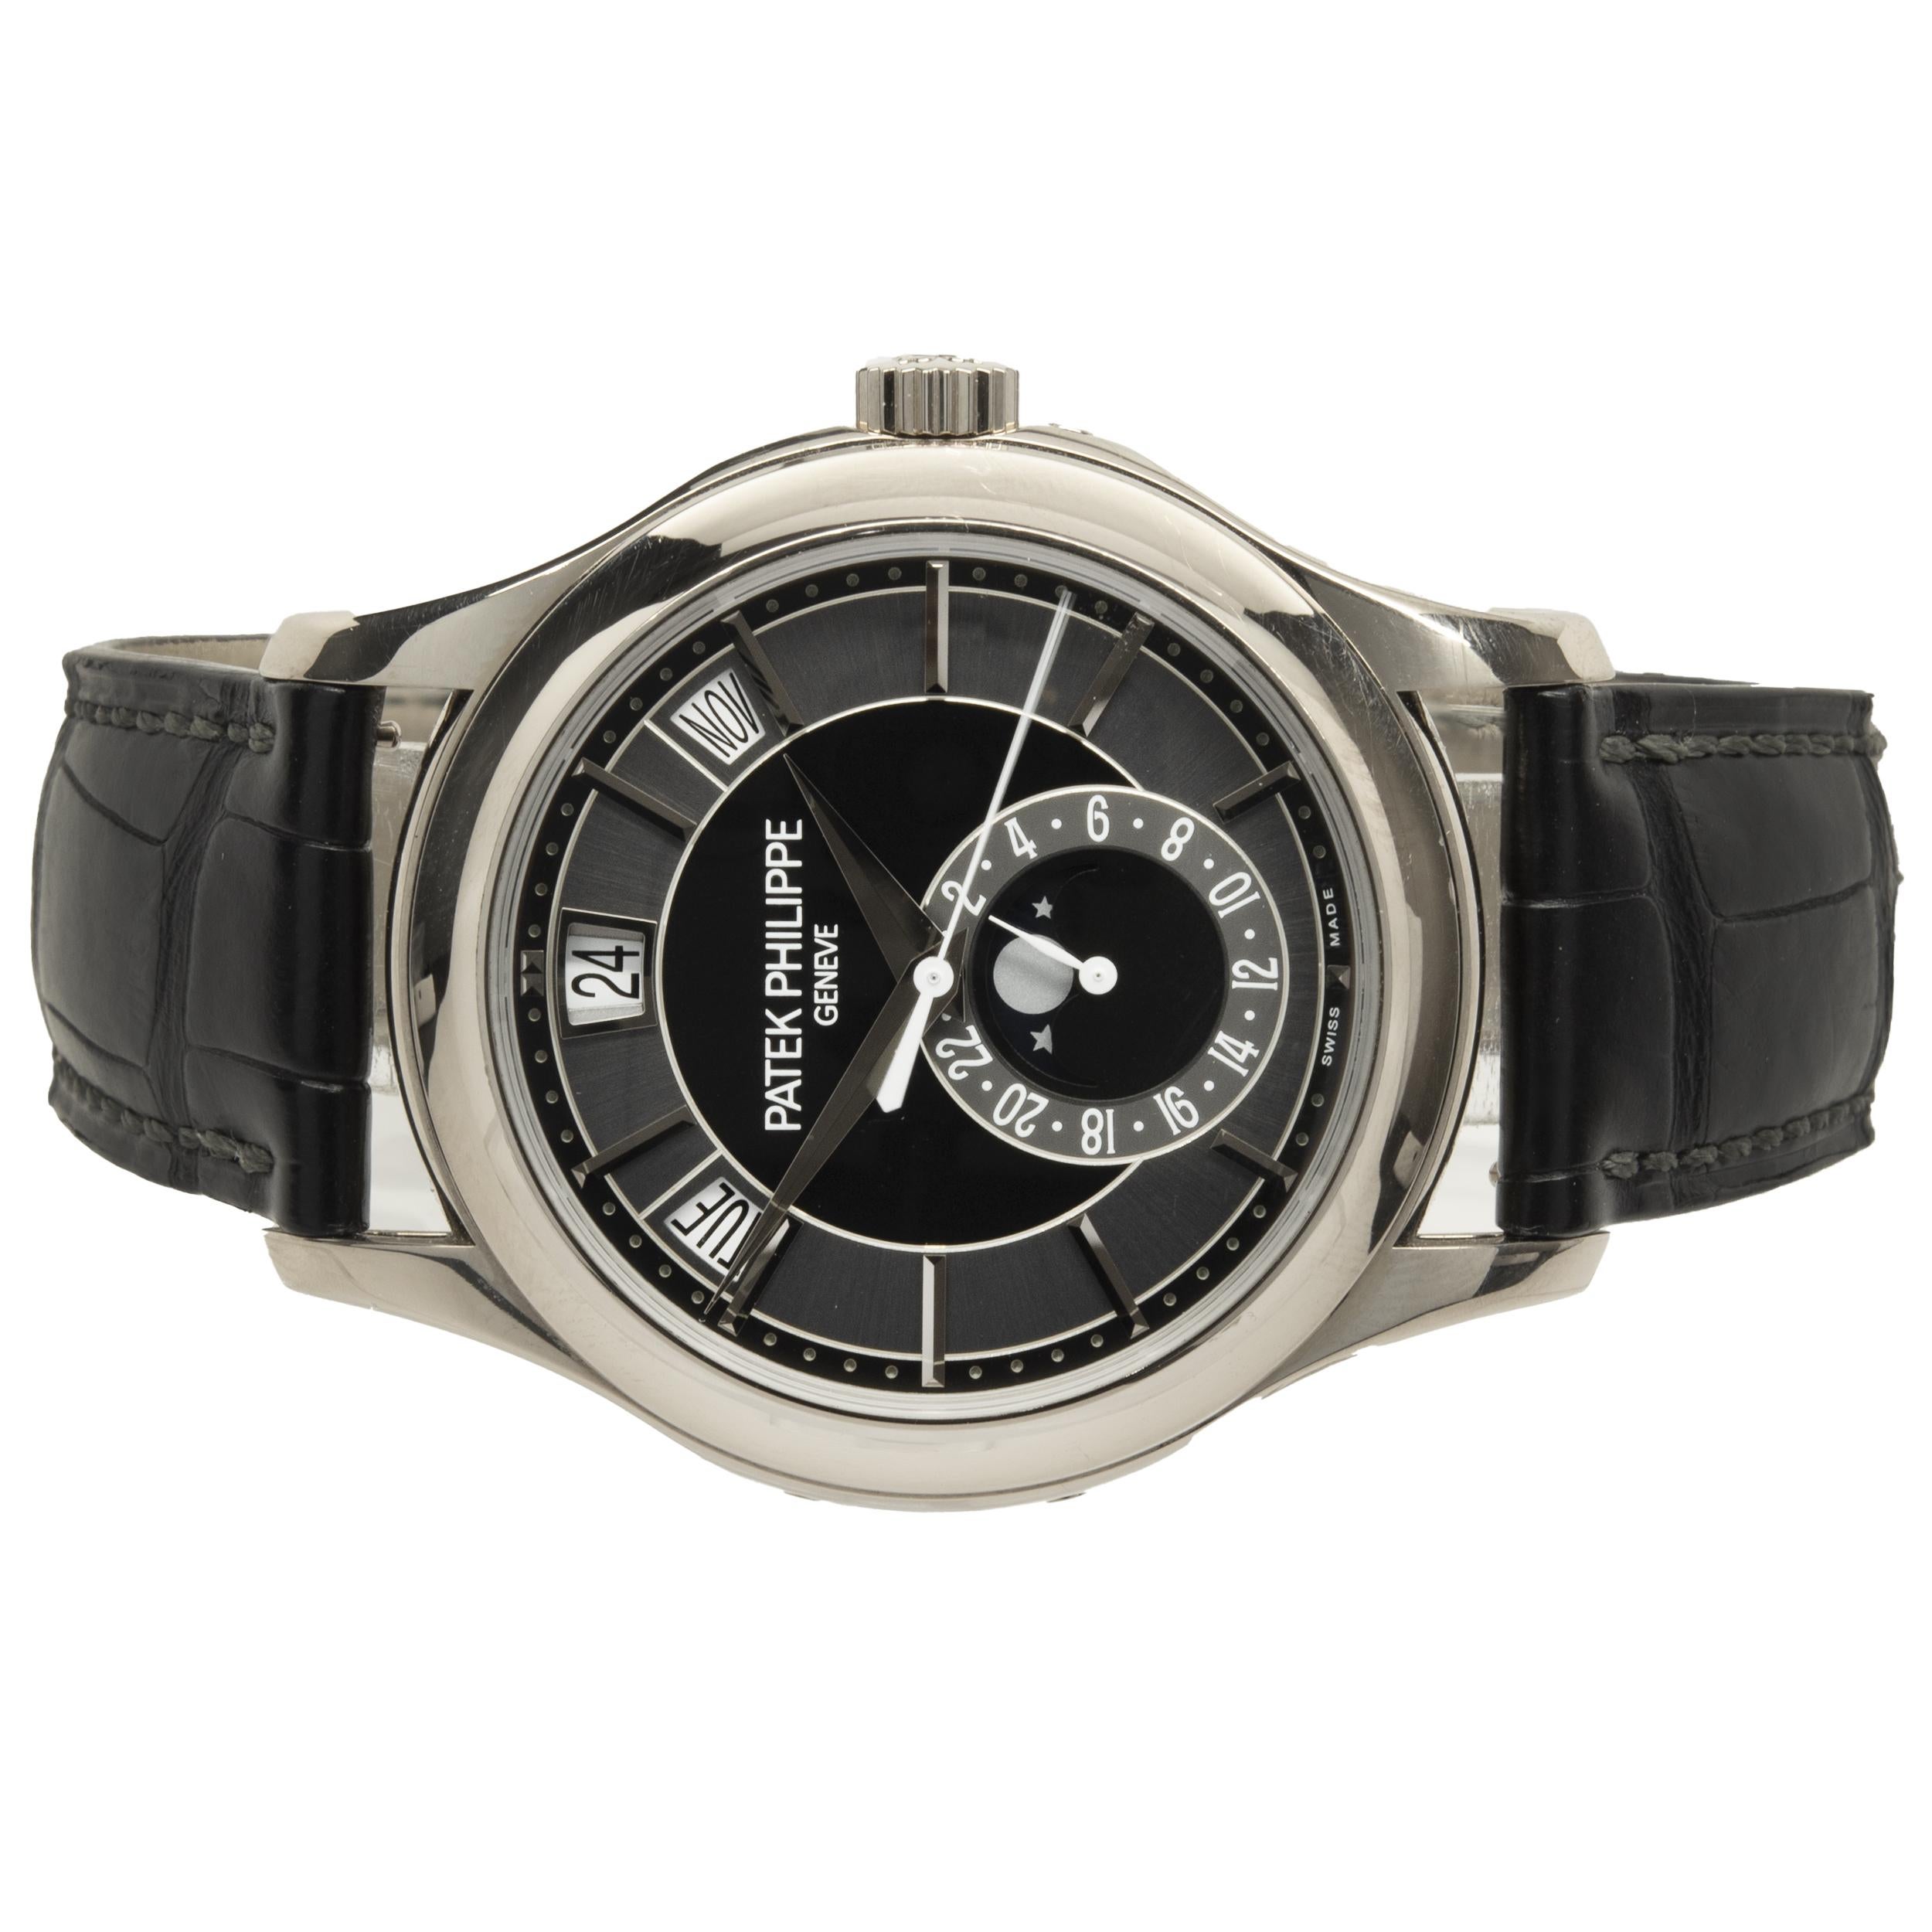 Movement: automatic
Function: hours, minutes, seconds, day, date, month, moonphase 
Case: 40mm 18K white gold case, smooth bezel, sapphire crystal, push pull crown
Band: black alligator strap, 18K white gold Patek buckle
Dial: Black sunburst, black